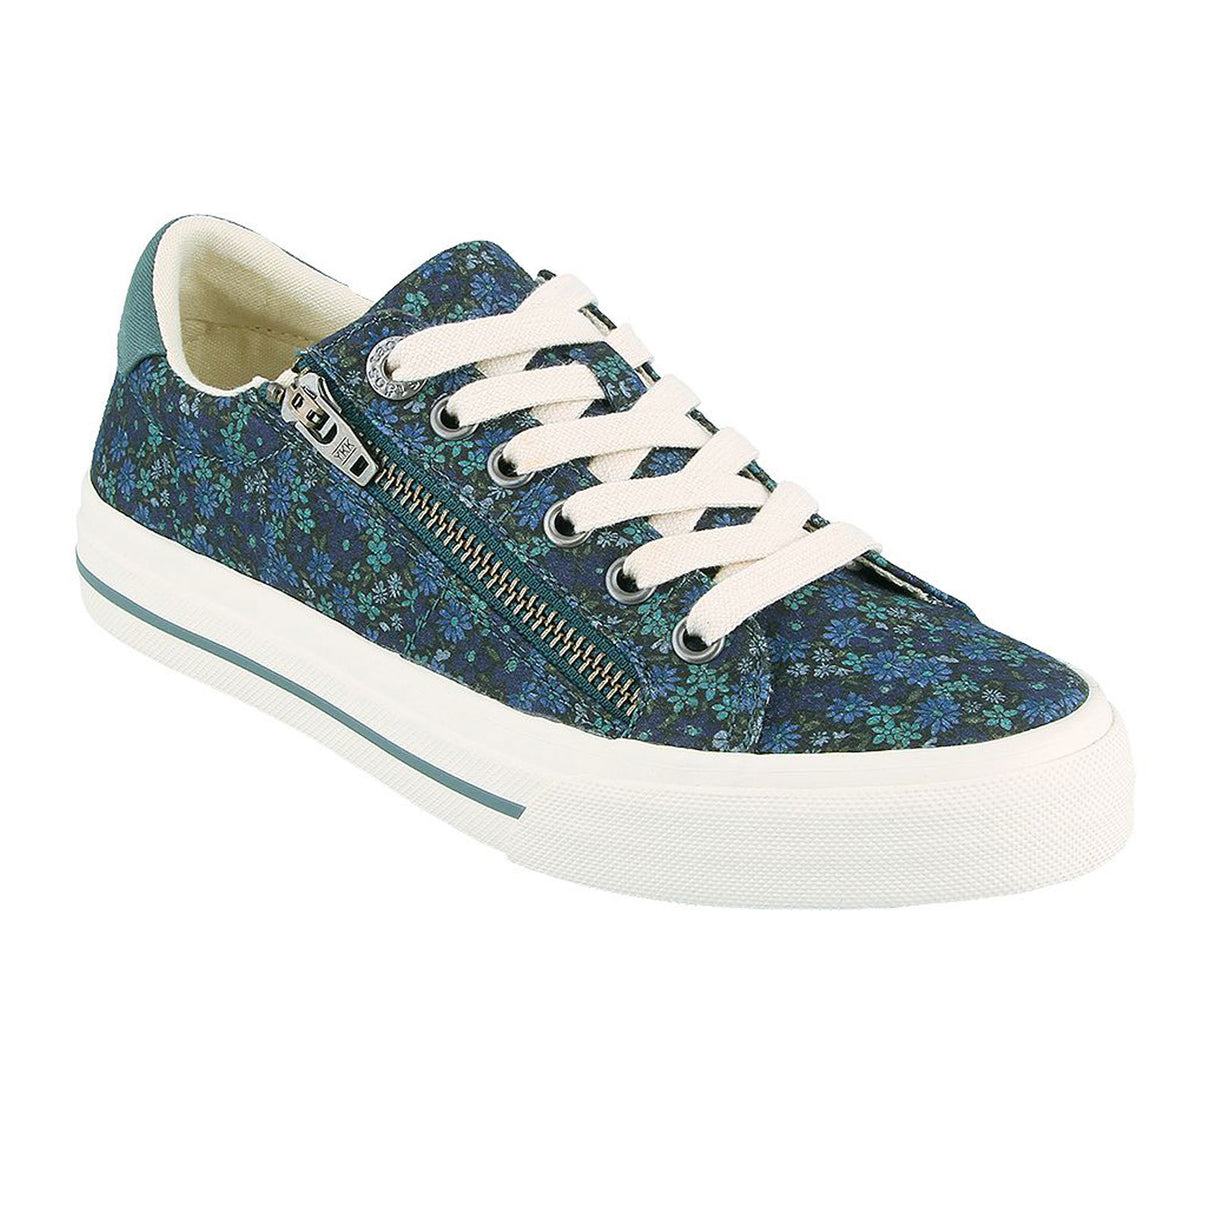 Taos Z Soul Sneaker (Women) - Teal Floral Multi Athletic - Casual - Lace Up - The Heel Shoe Fitters